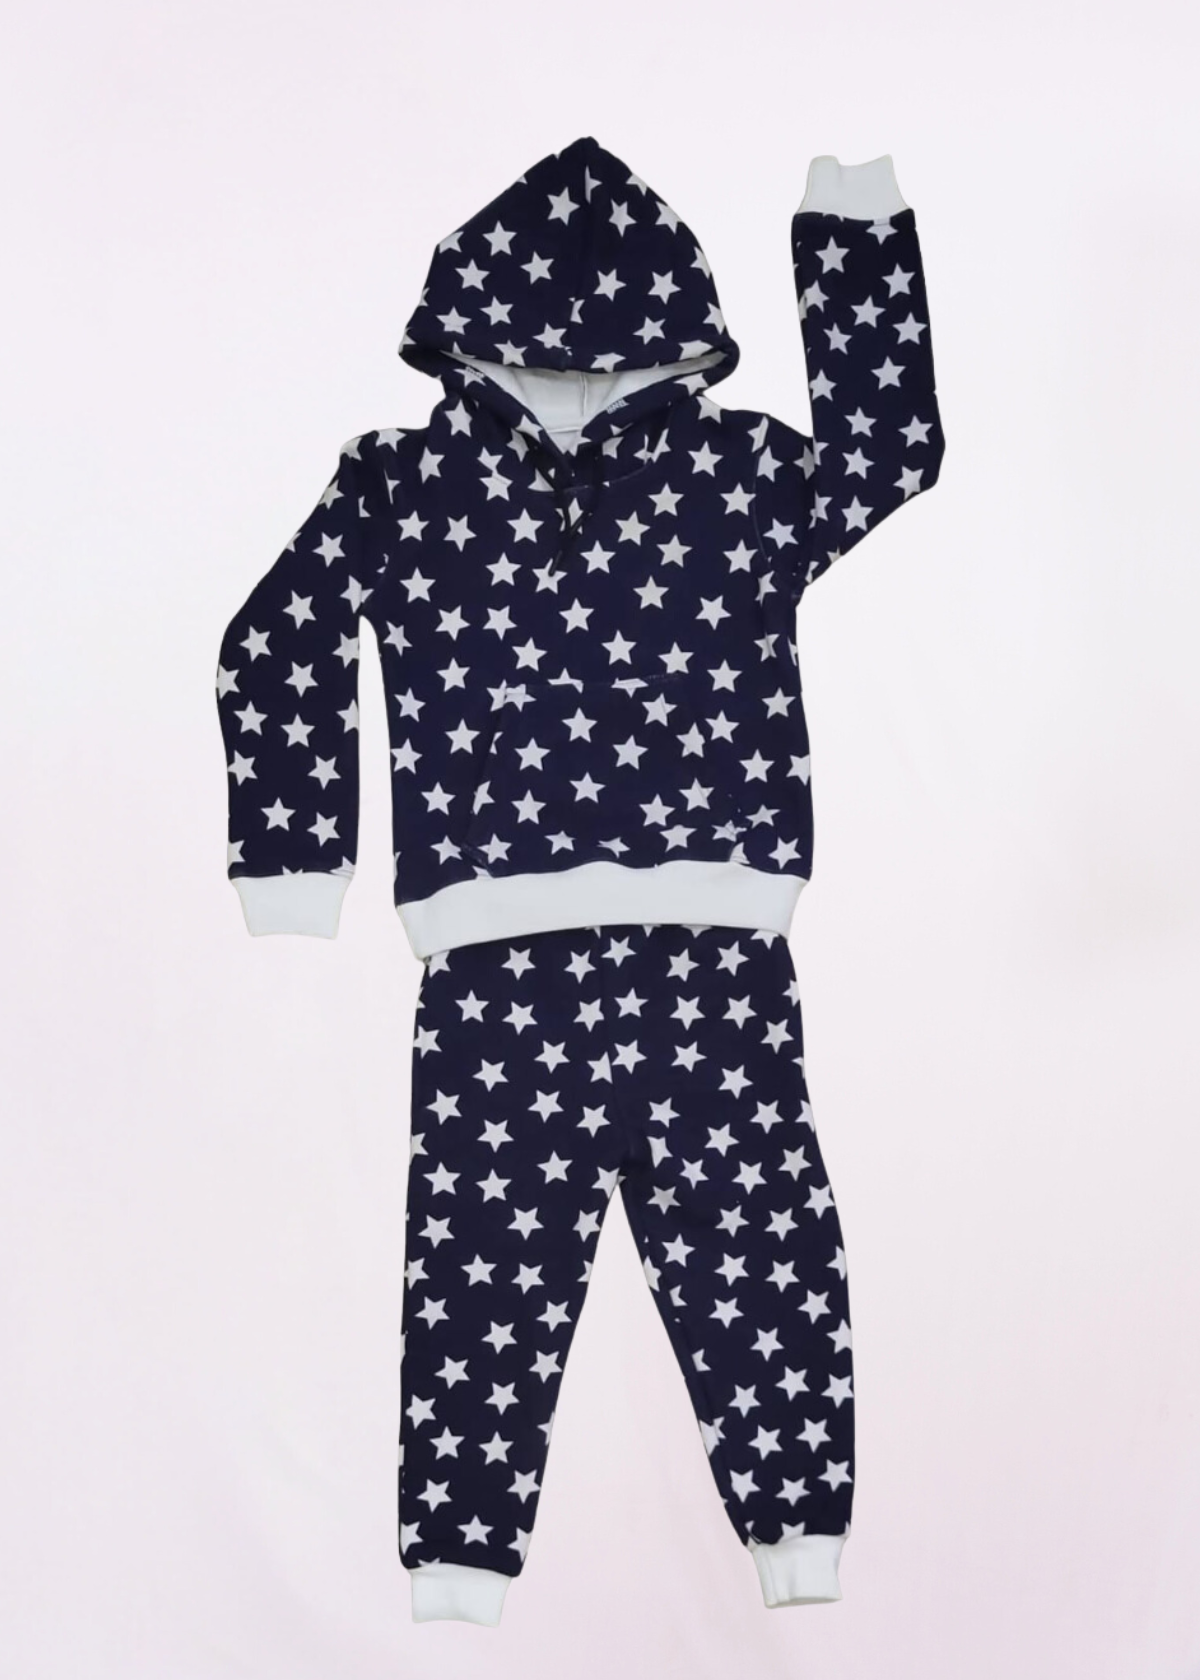 NAUTICON Stars Printed Perfect Pair Co-ord Set for Kids/Navy Blue